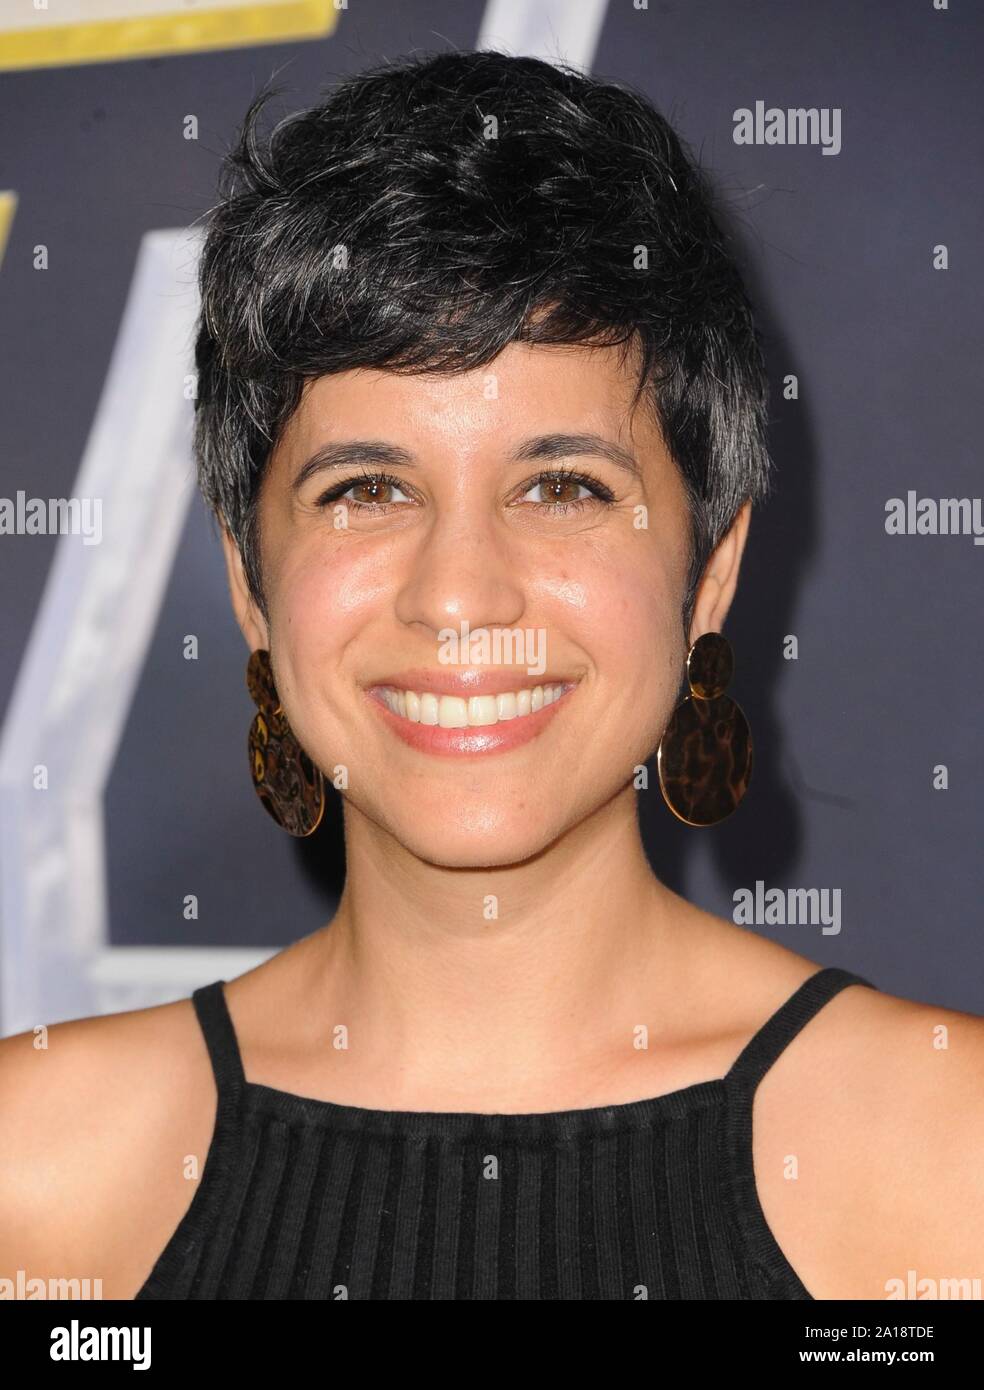 Ashly Burch and Lance Reddick attend The Game Awards 2017 at News Photo  - Getty Images